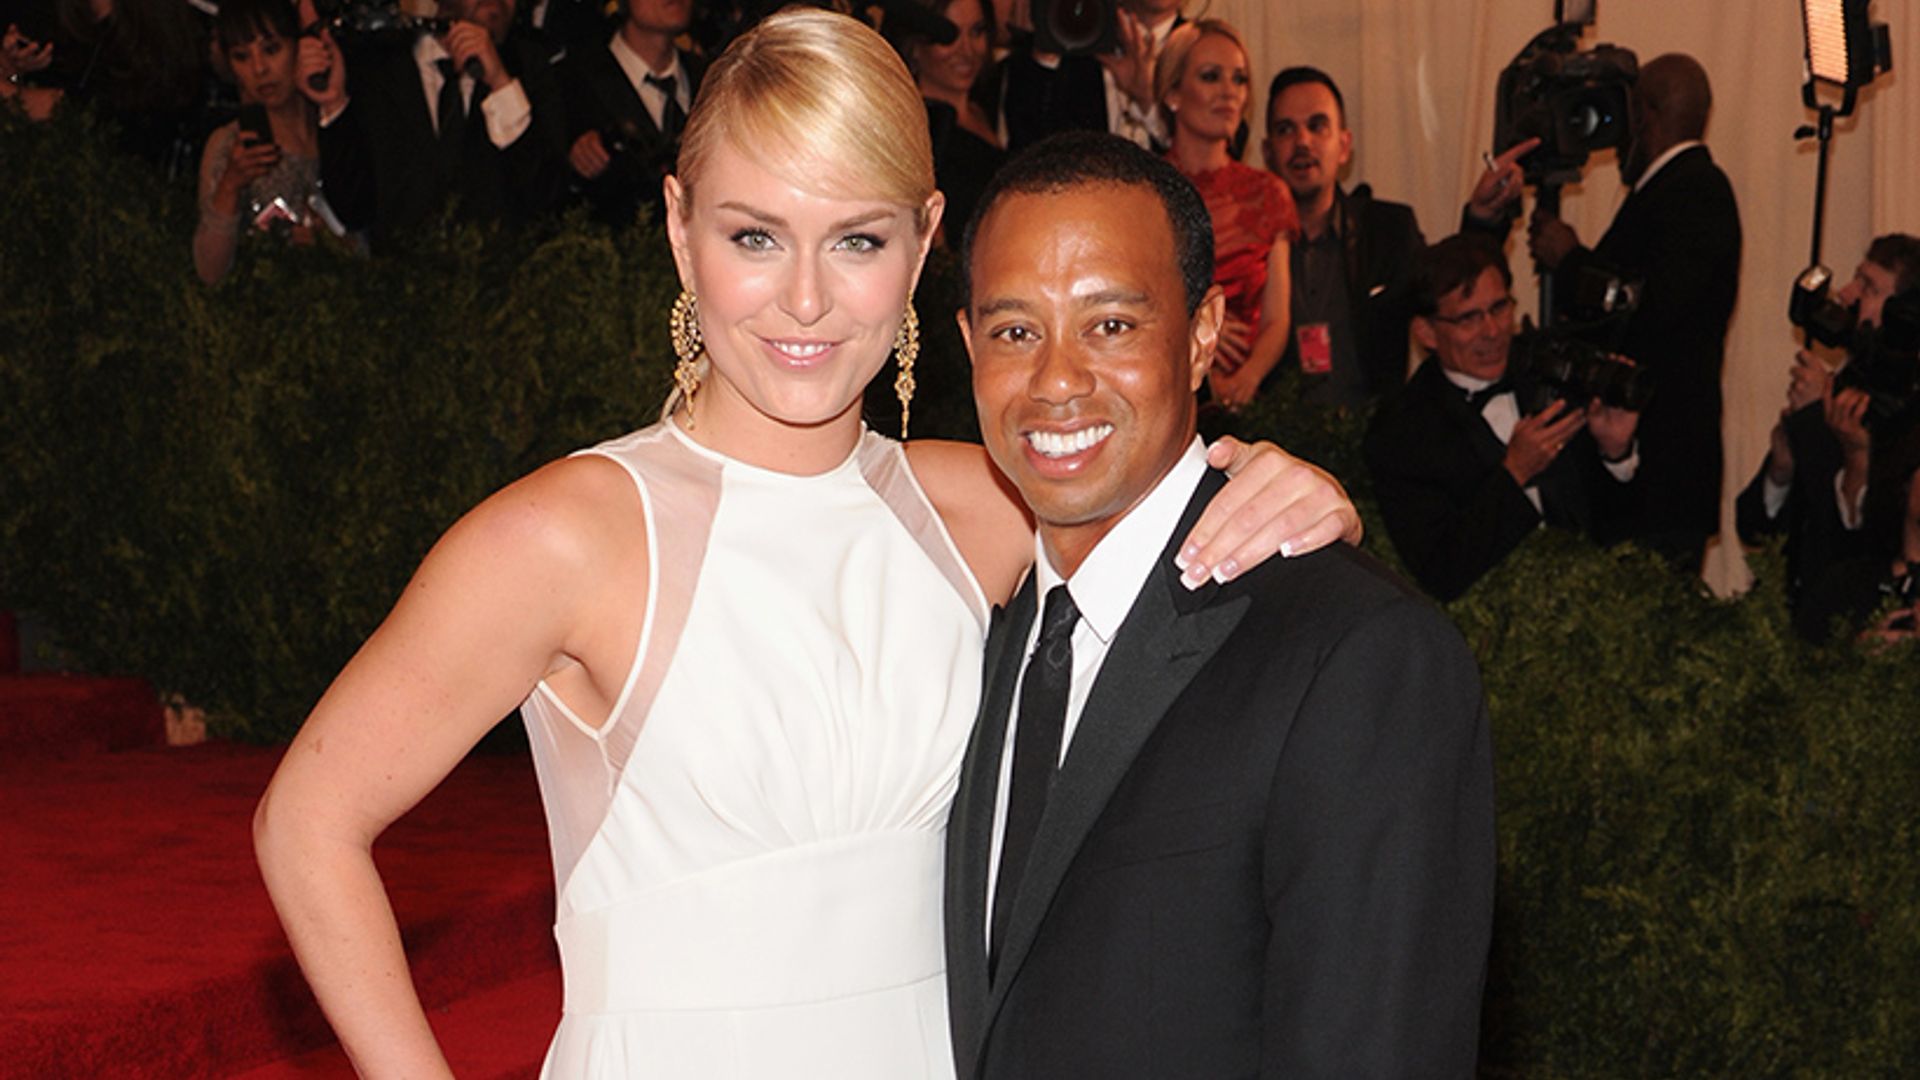 Tiger Woods ex-girlfriend Lindsey Vonn responds to leaked photos HELLO! image pic